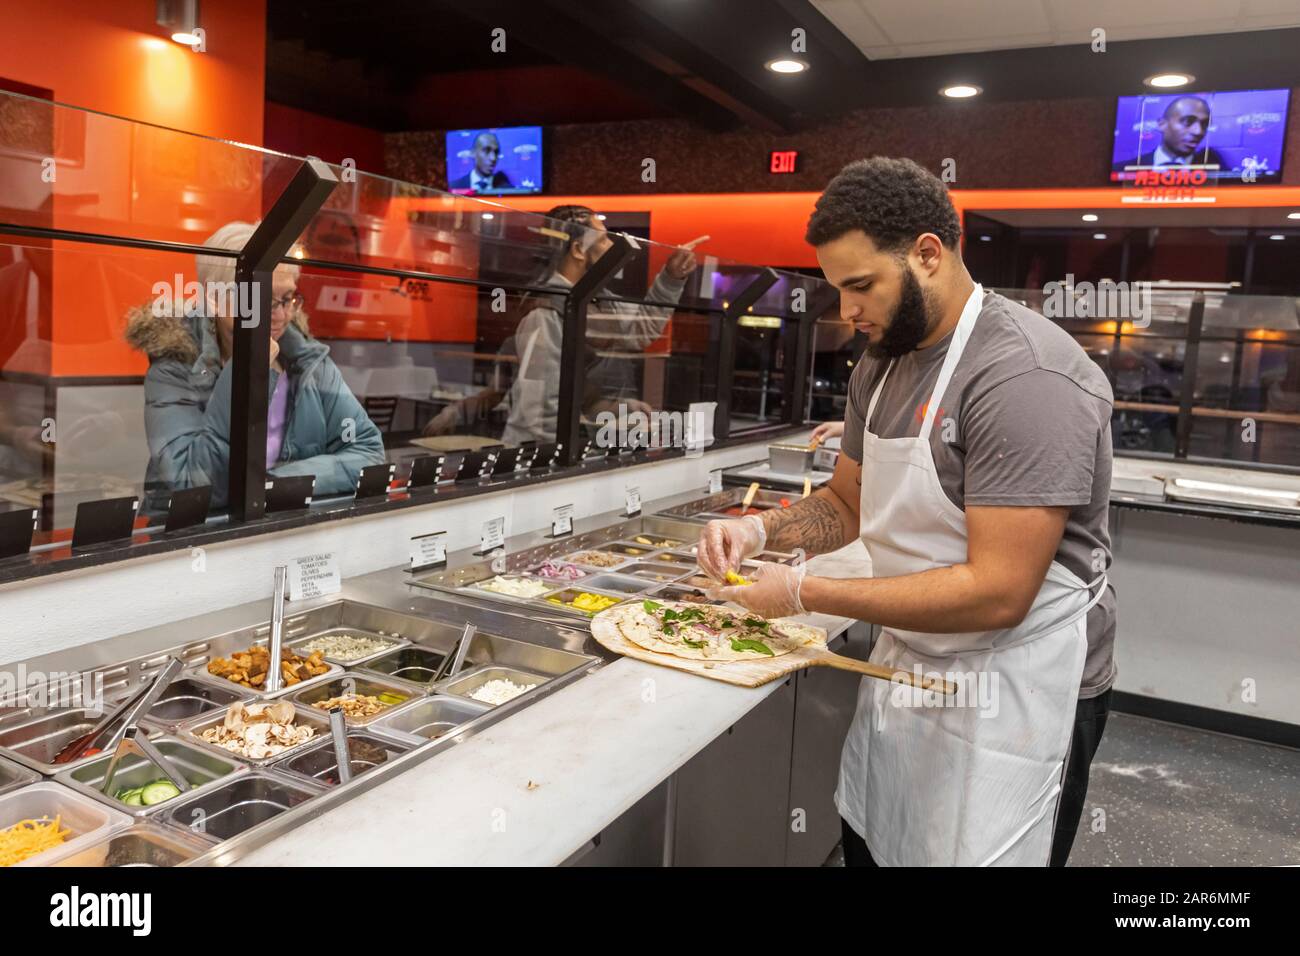 Detroit, Michigan - A worker makes a pizza at the Flamz Pizzeria in the city's Morningside neighborhood. The restaurant offers made to order pizzas wi Stock Photo